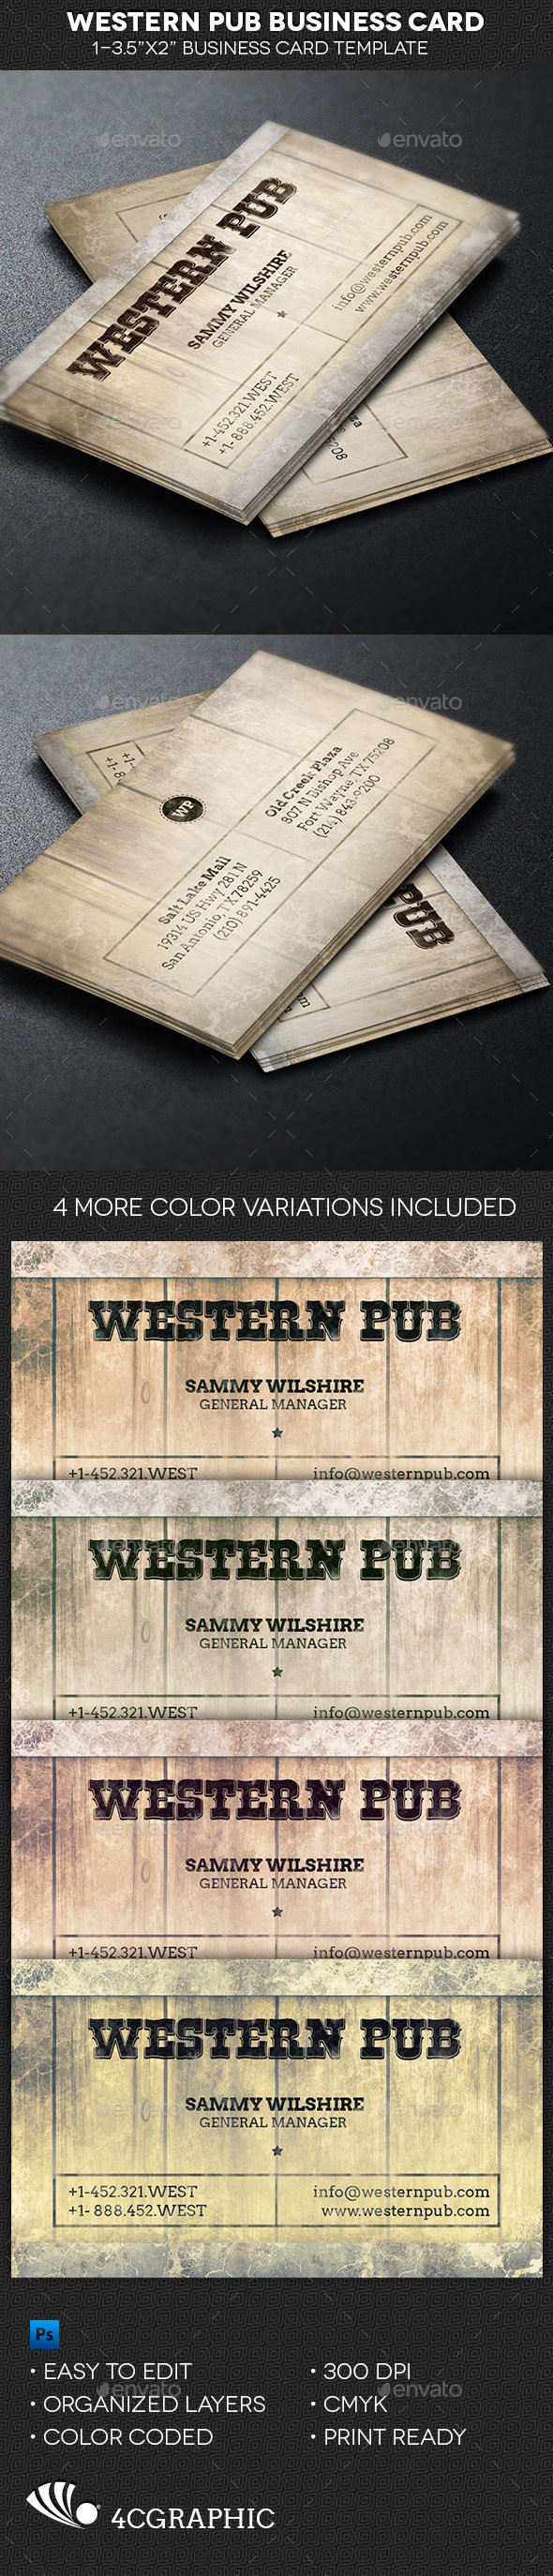 Western pub business card template preview